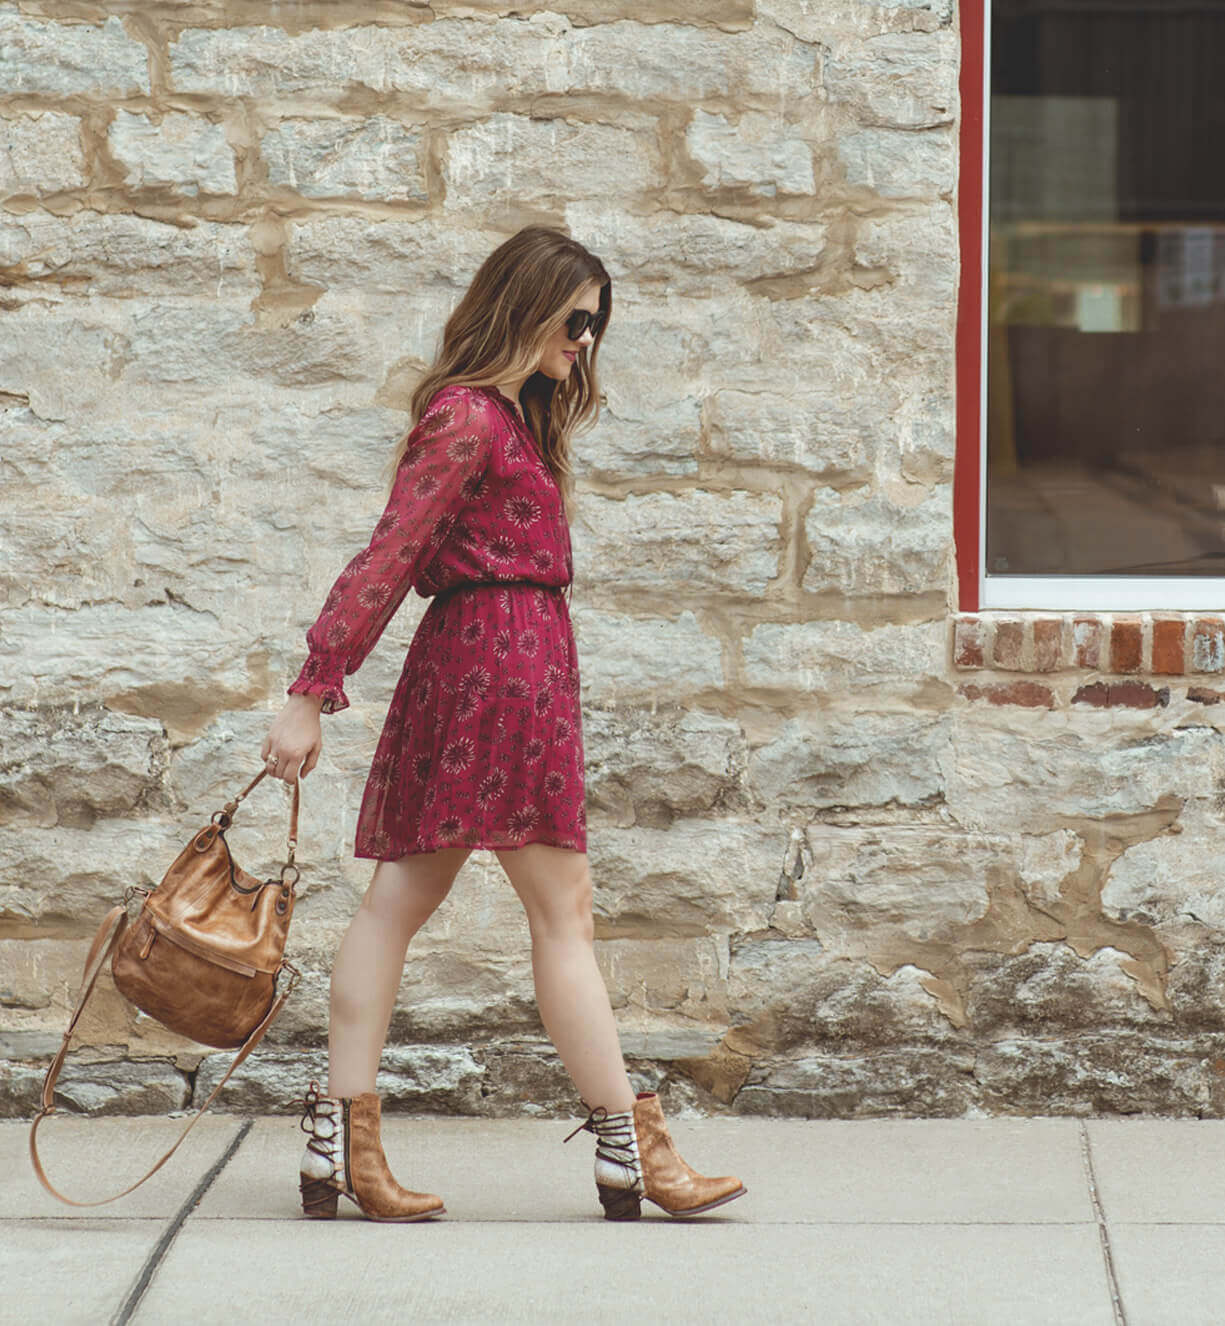 A woman walking down the street in a pink dress and Bed Stu Tahiti boots.